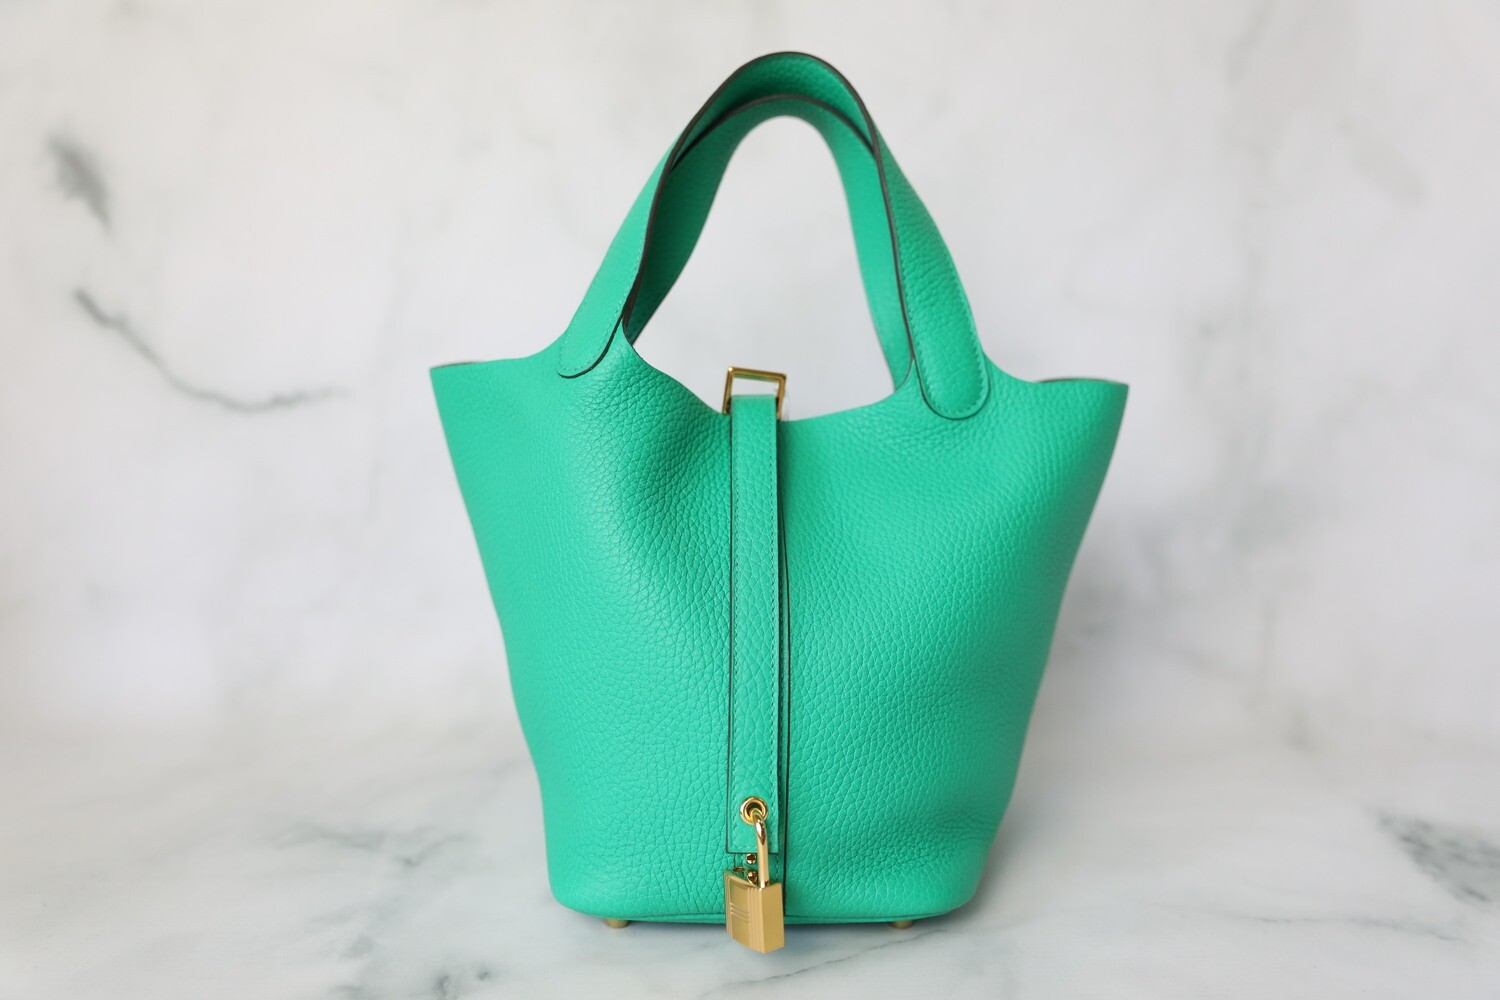 Hermes Picotin 18, Menthe Green with Gold Hardware, New in Box